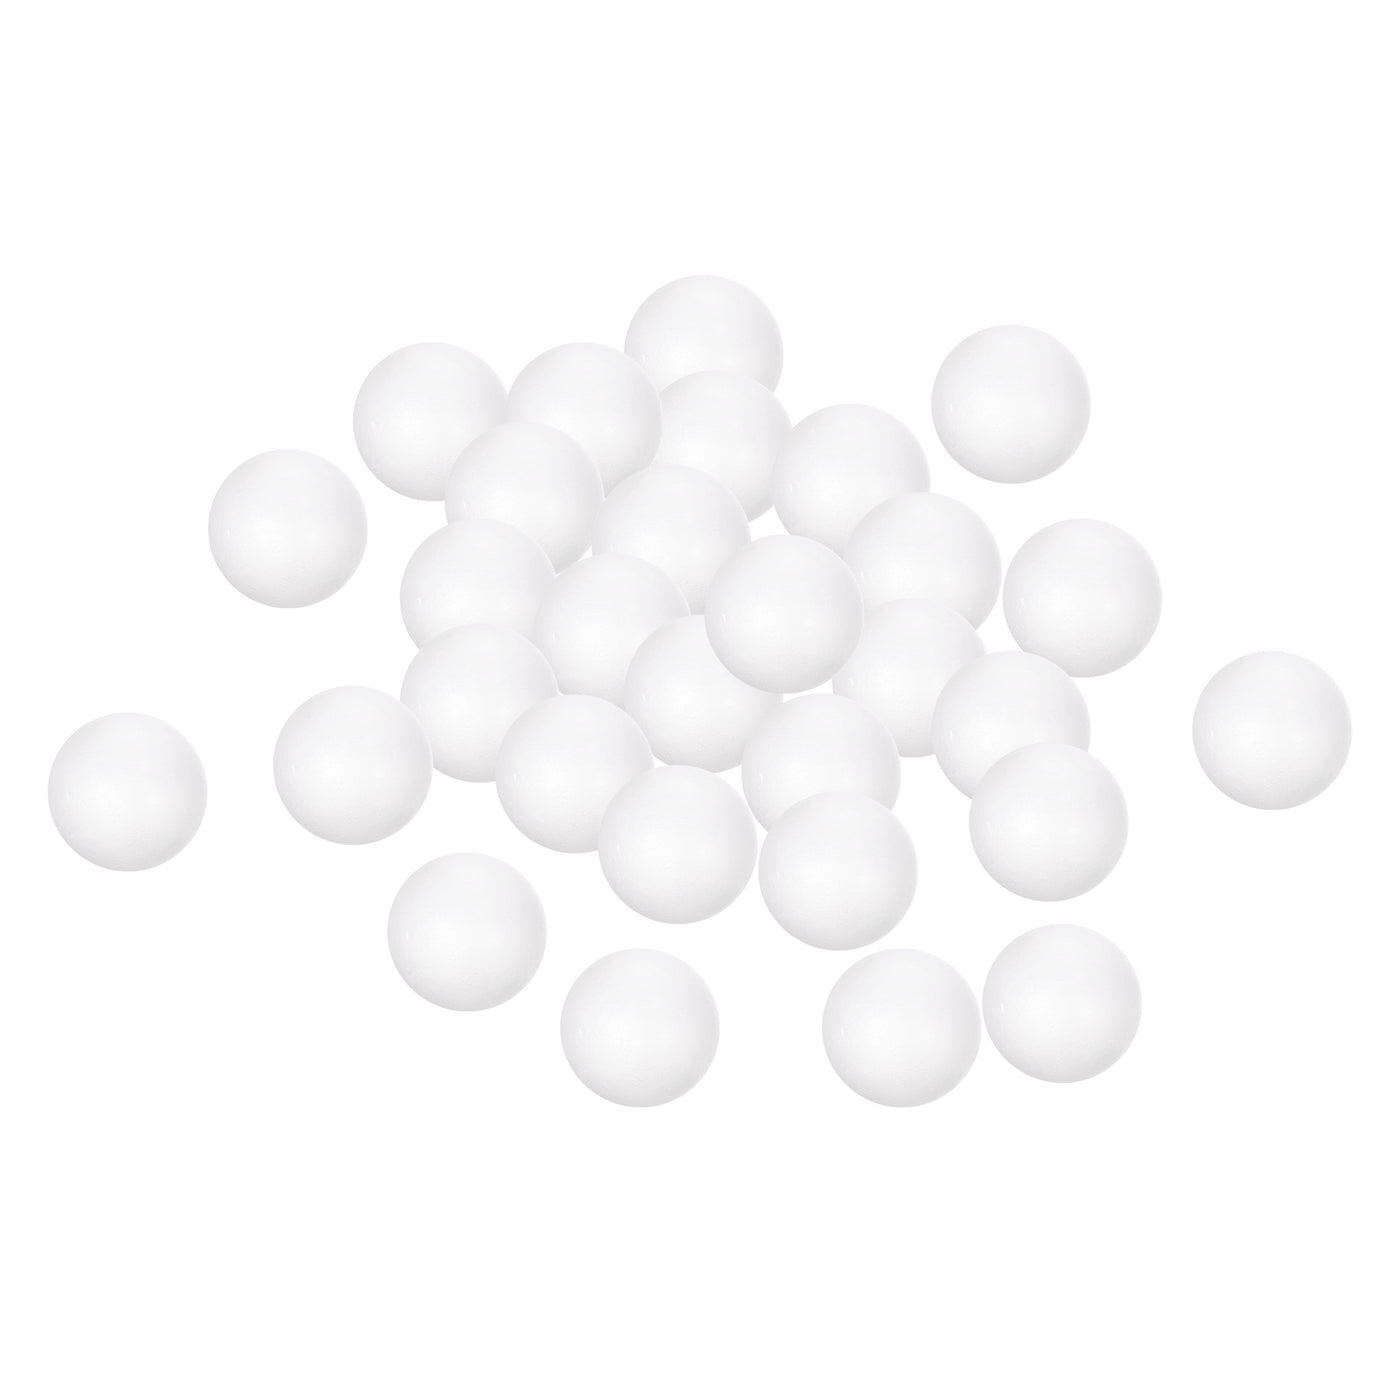 Uxcell Uxcell 72Pcs 1.65" White Polystyrene Foam Solid Balls for Crafts and Party Decorations